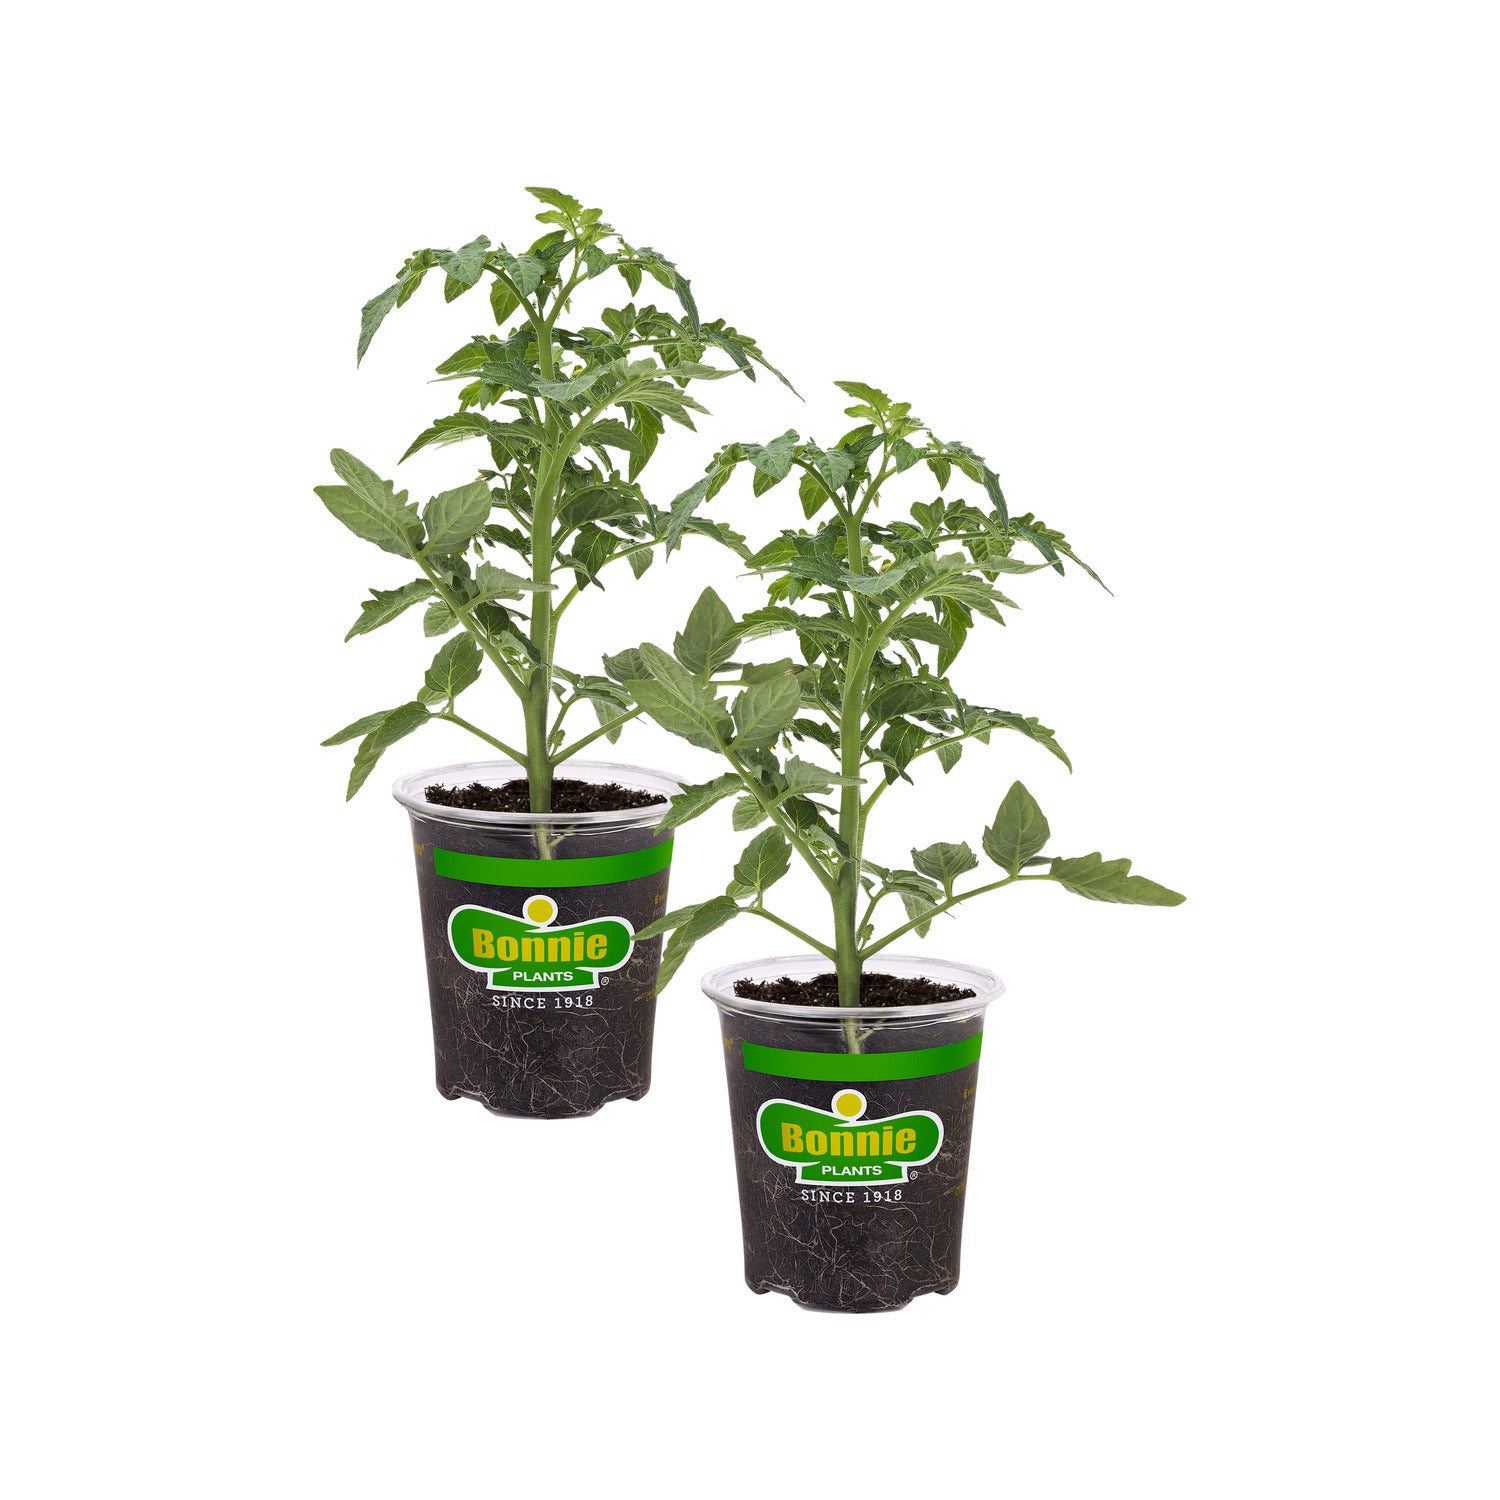 Tidy Rose Tomato (2 Pack)